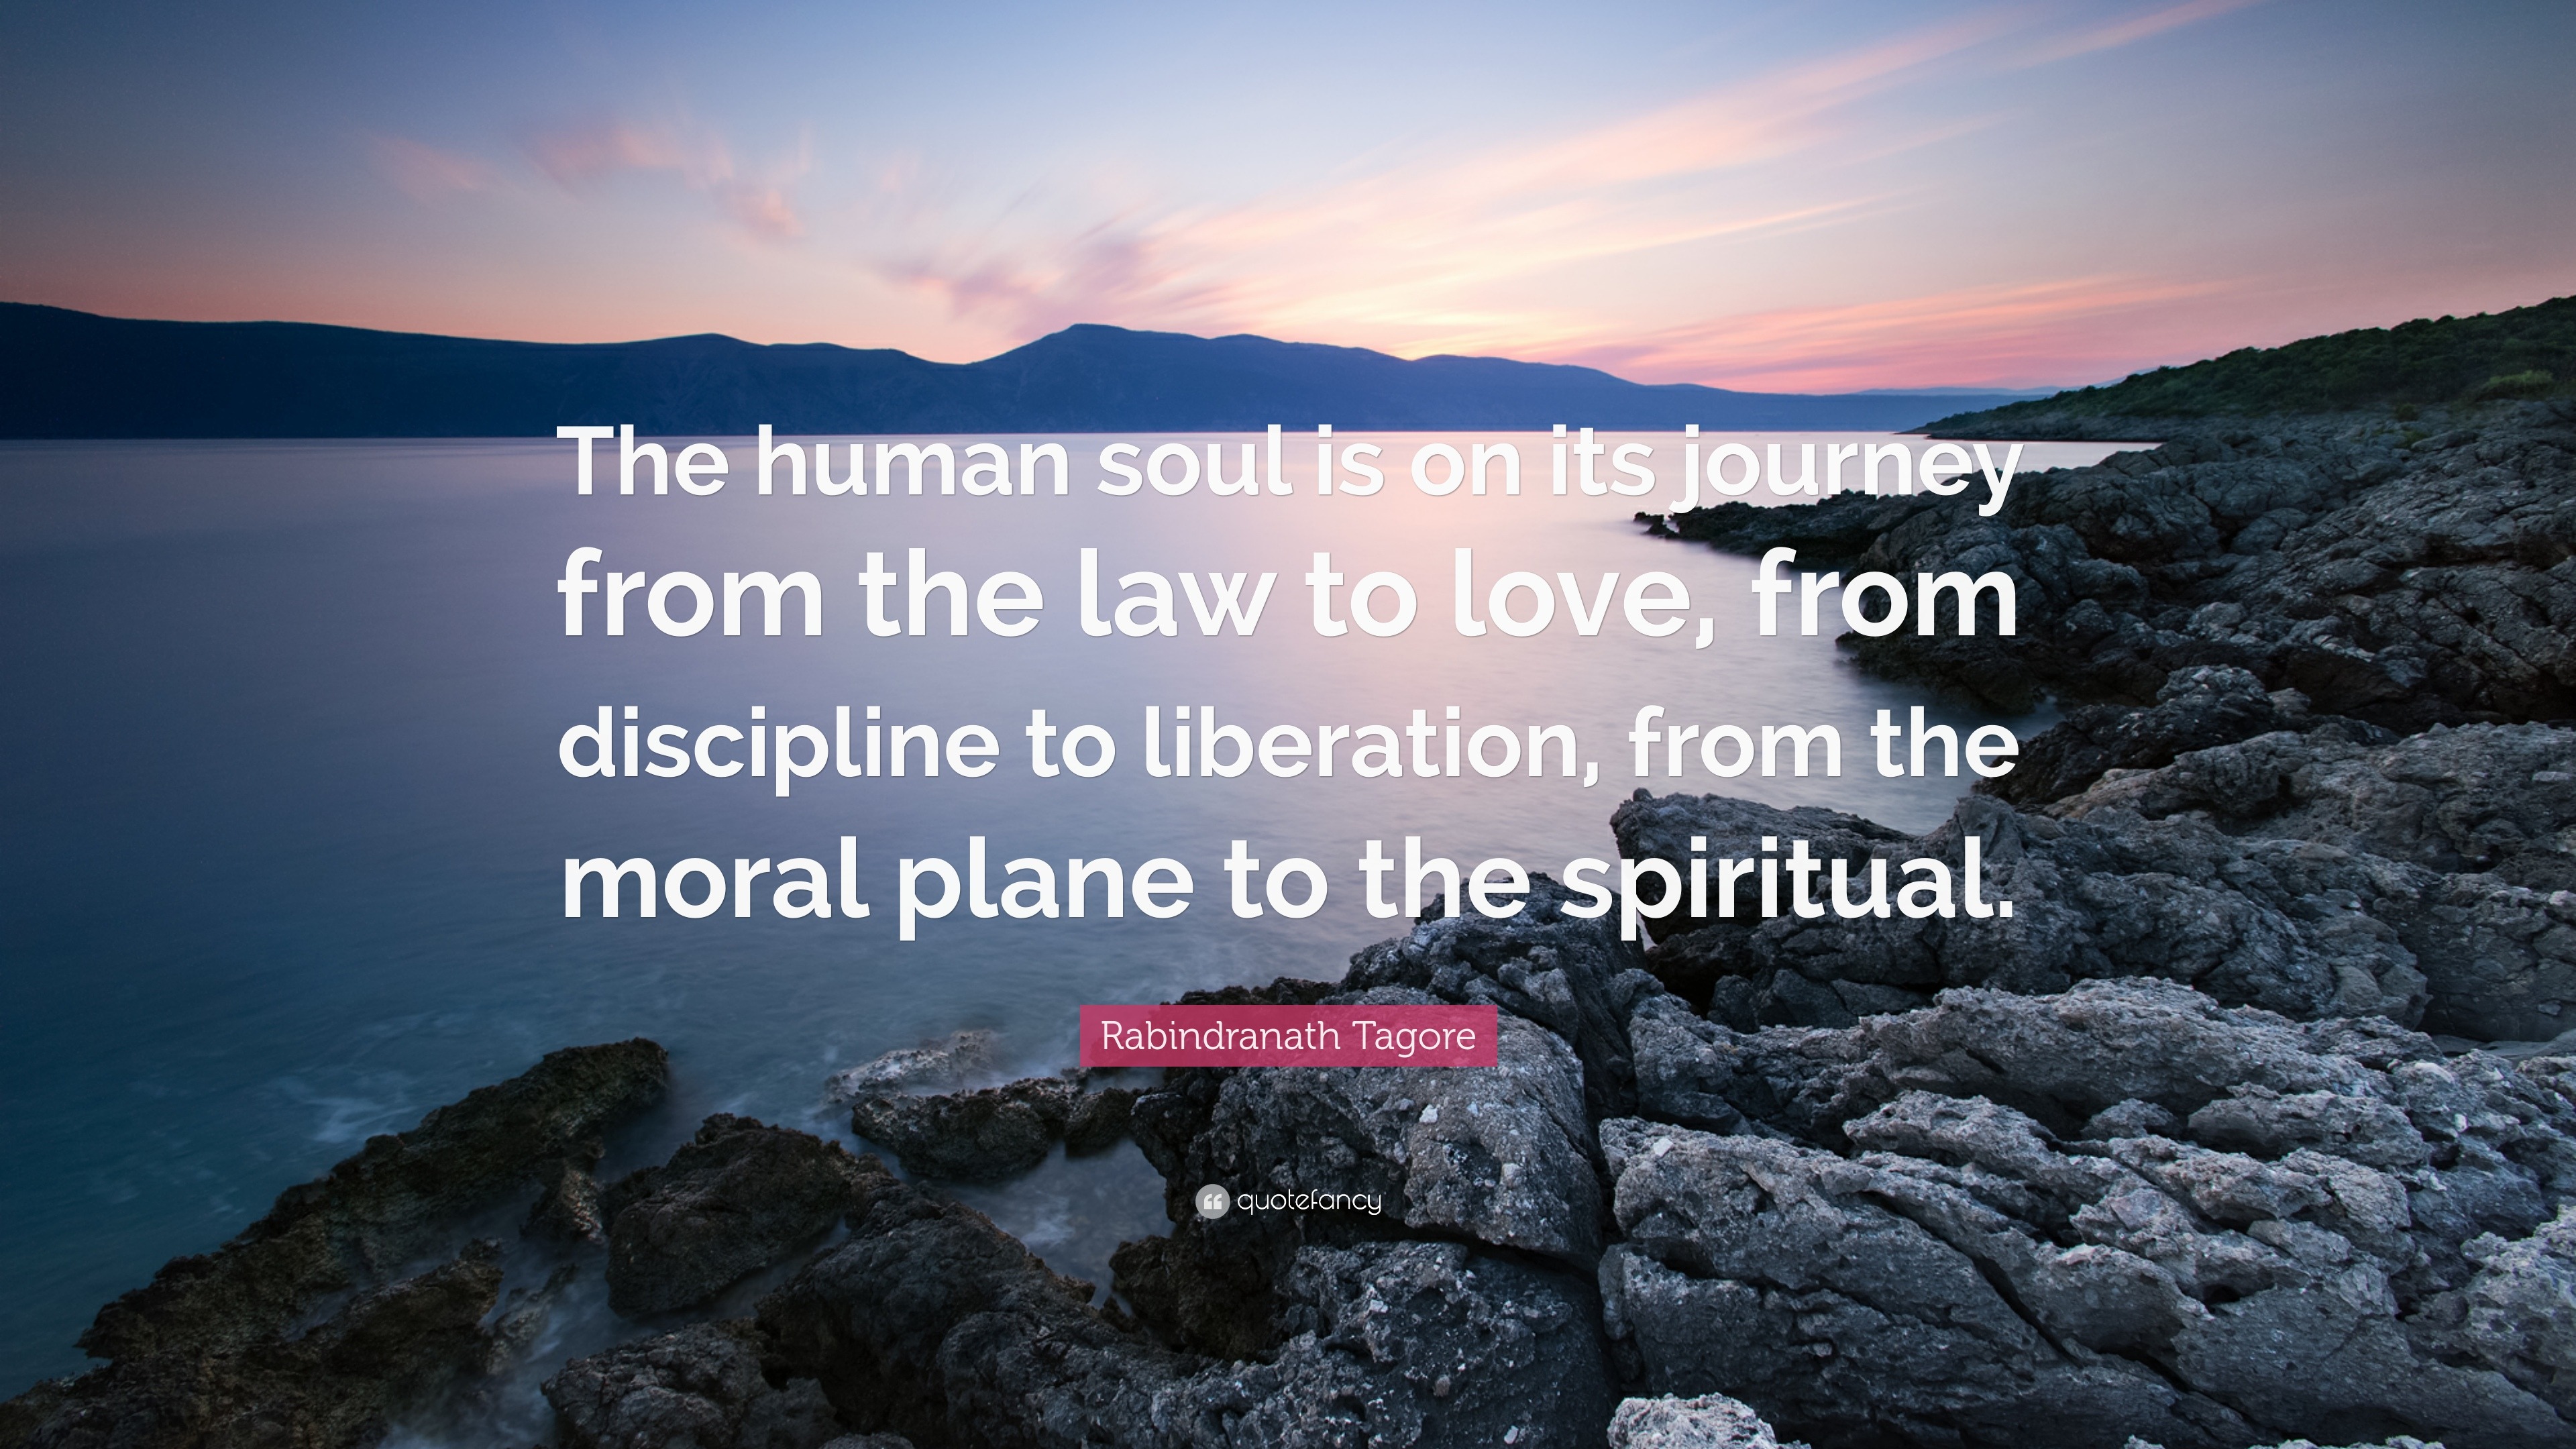 Rabindranath ore Quote The Human Soul Is On Its Journey From The Law To Love From Discipline To Liberation From The Moral Plane To The Spirit